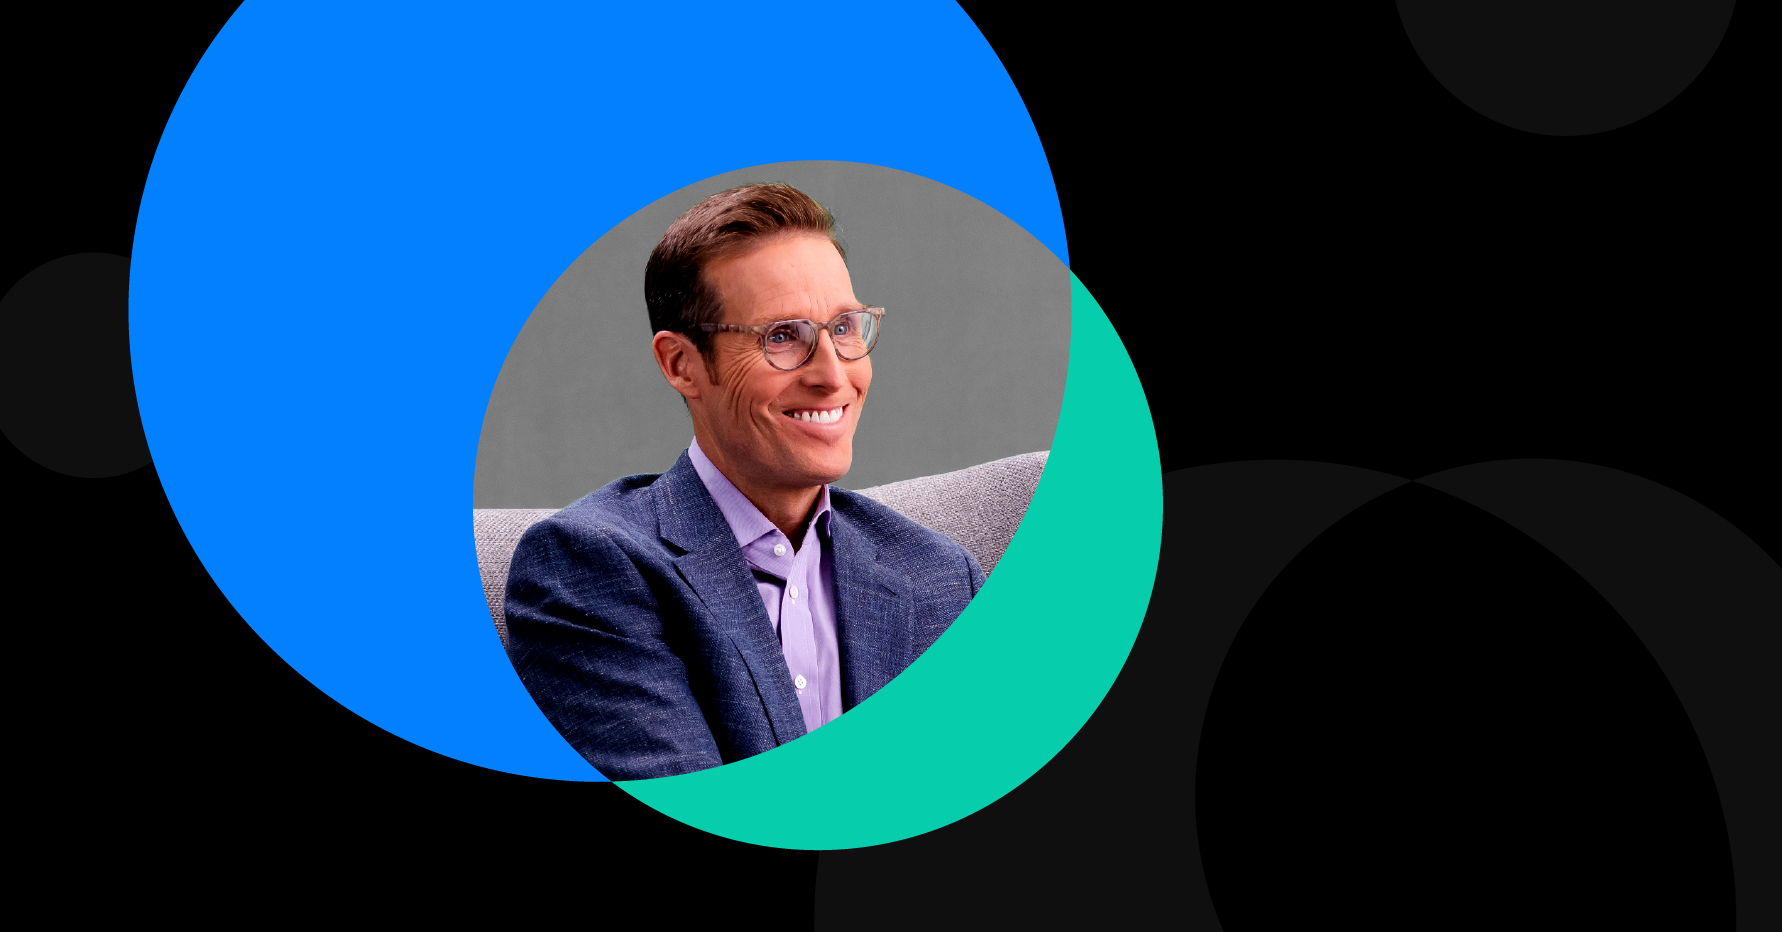 Portrait of Andy Byrne overlapping a blue circle and a green circle